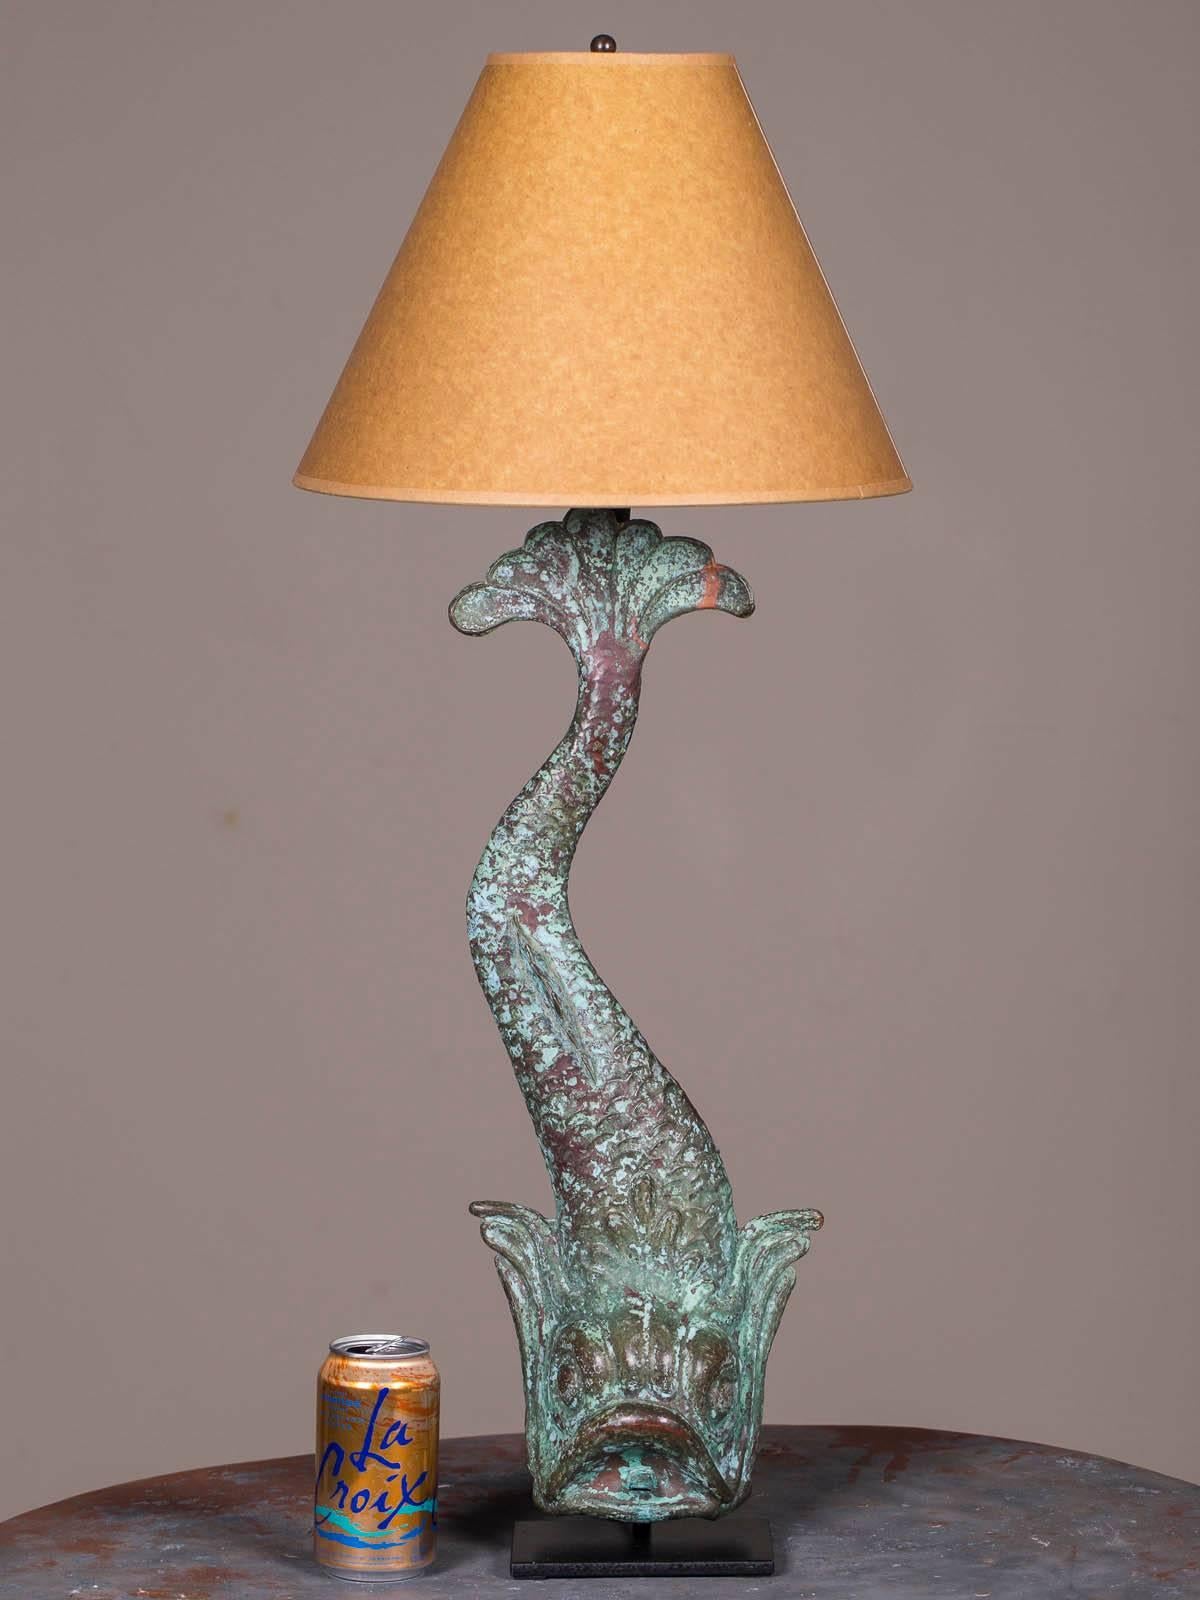 A marvellous antique French copper dolphin waterspout custom lamp from a wall fountain, circa 1895 retaining its original finish now mounted on a custom iron stand and topped with a bronzed paper shade. Please notice the sensuous curve of the